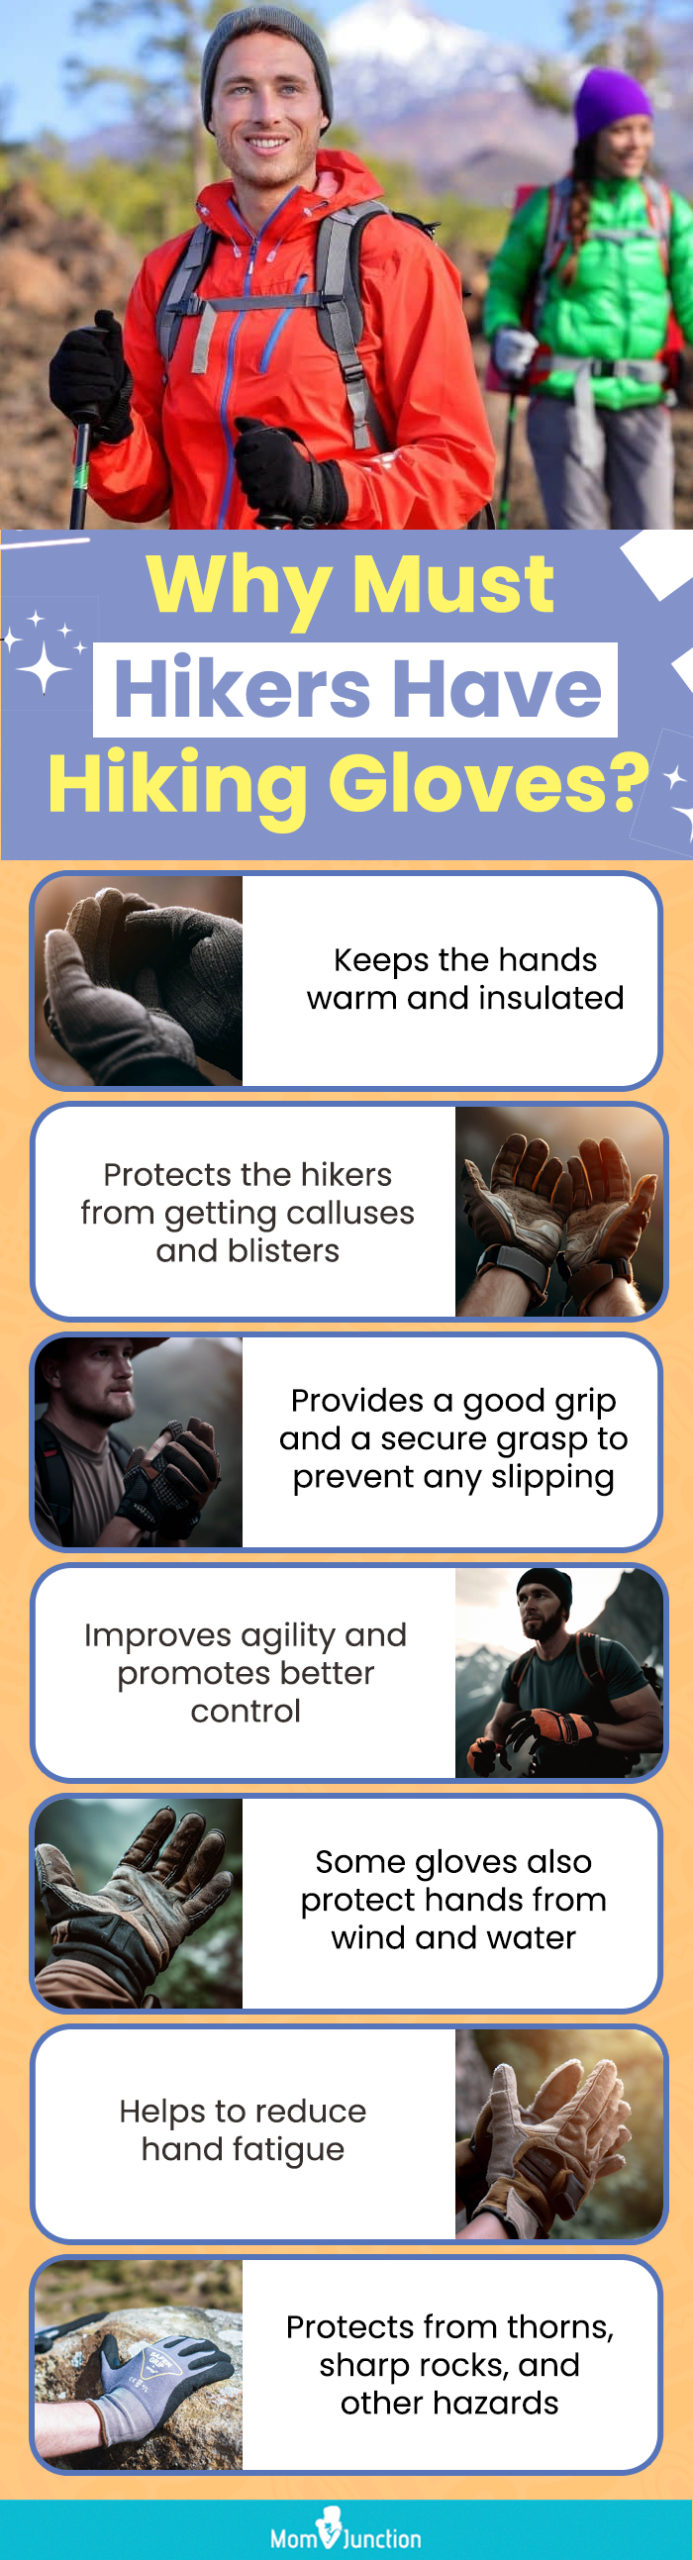 Why Must Hikers Have Hiking Gloves (infographic)